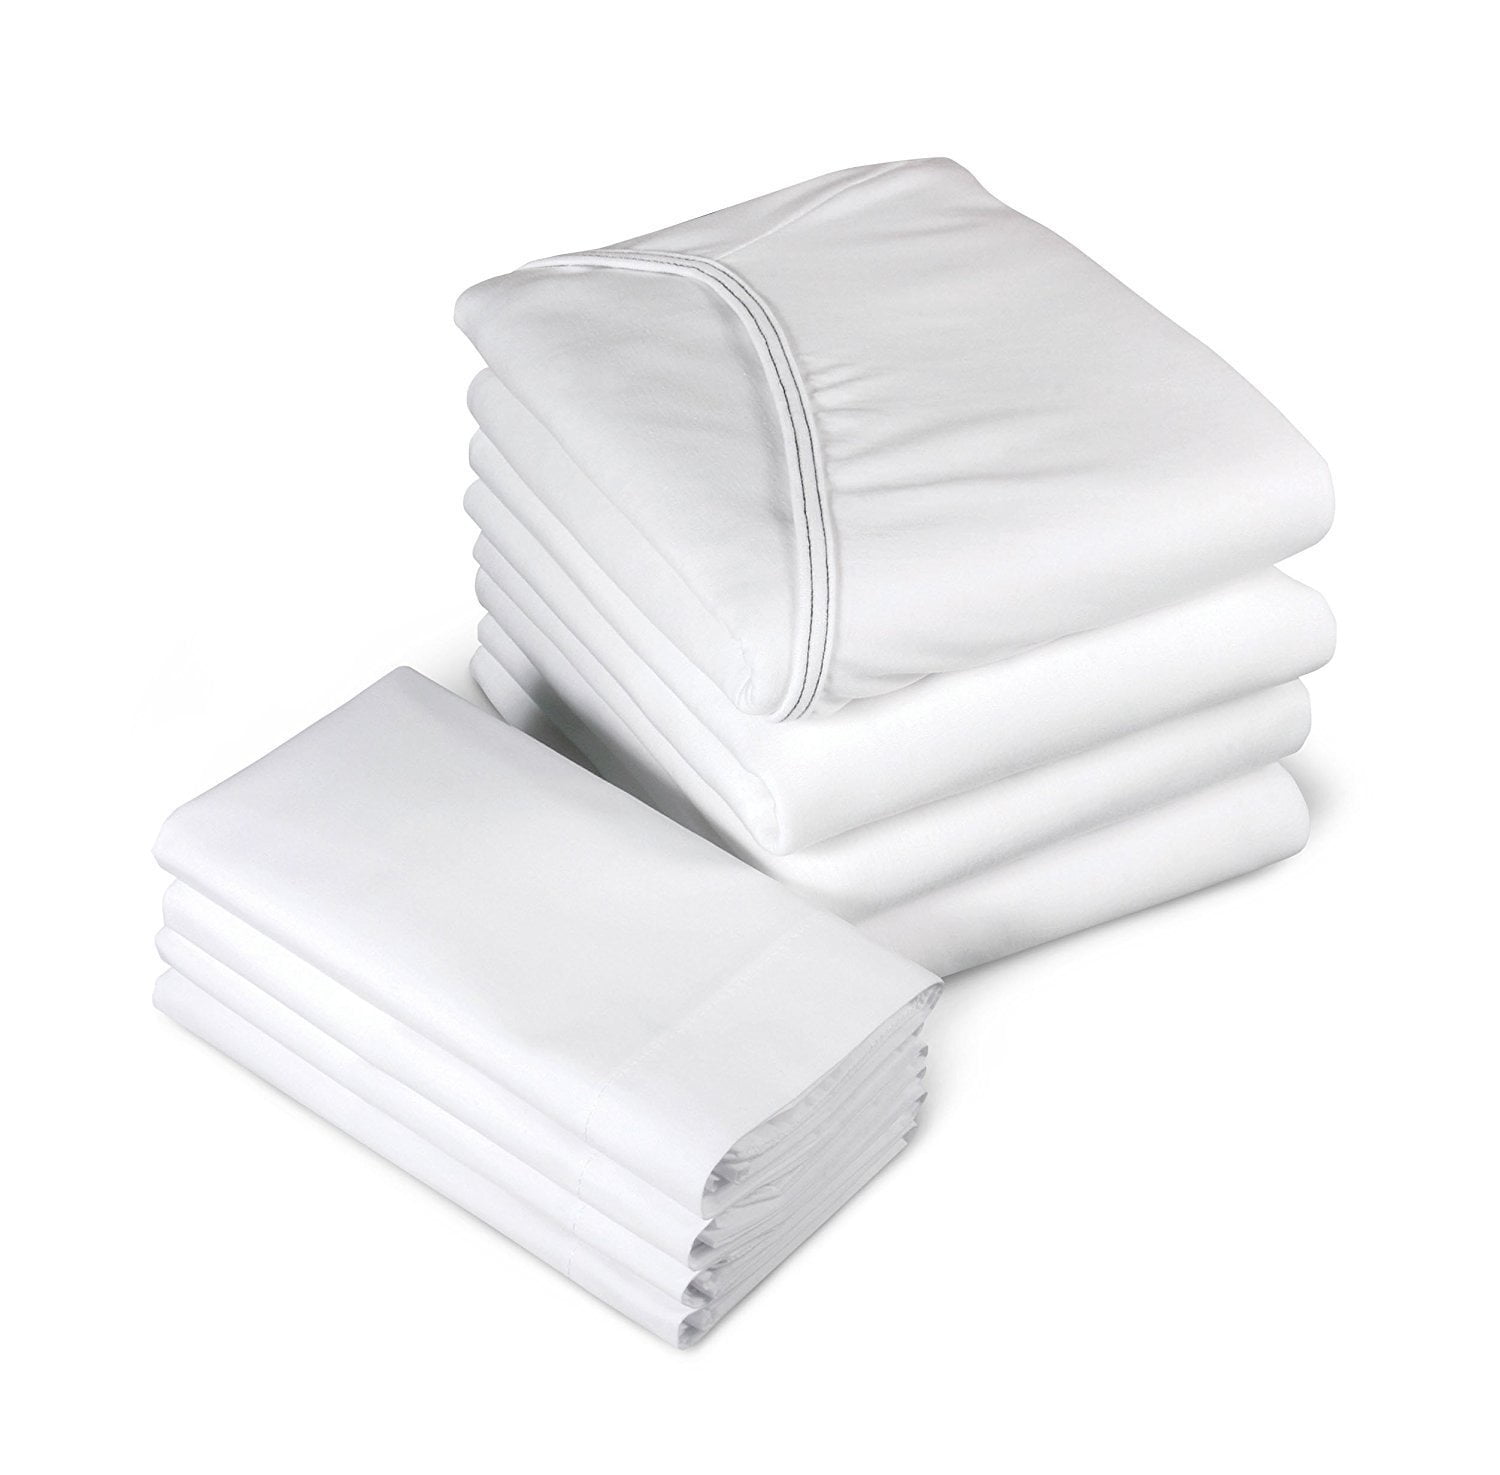 2 new hospital twin xl fitted sheets 36x84x9 white t130 hospital medco pro brand 